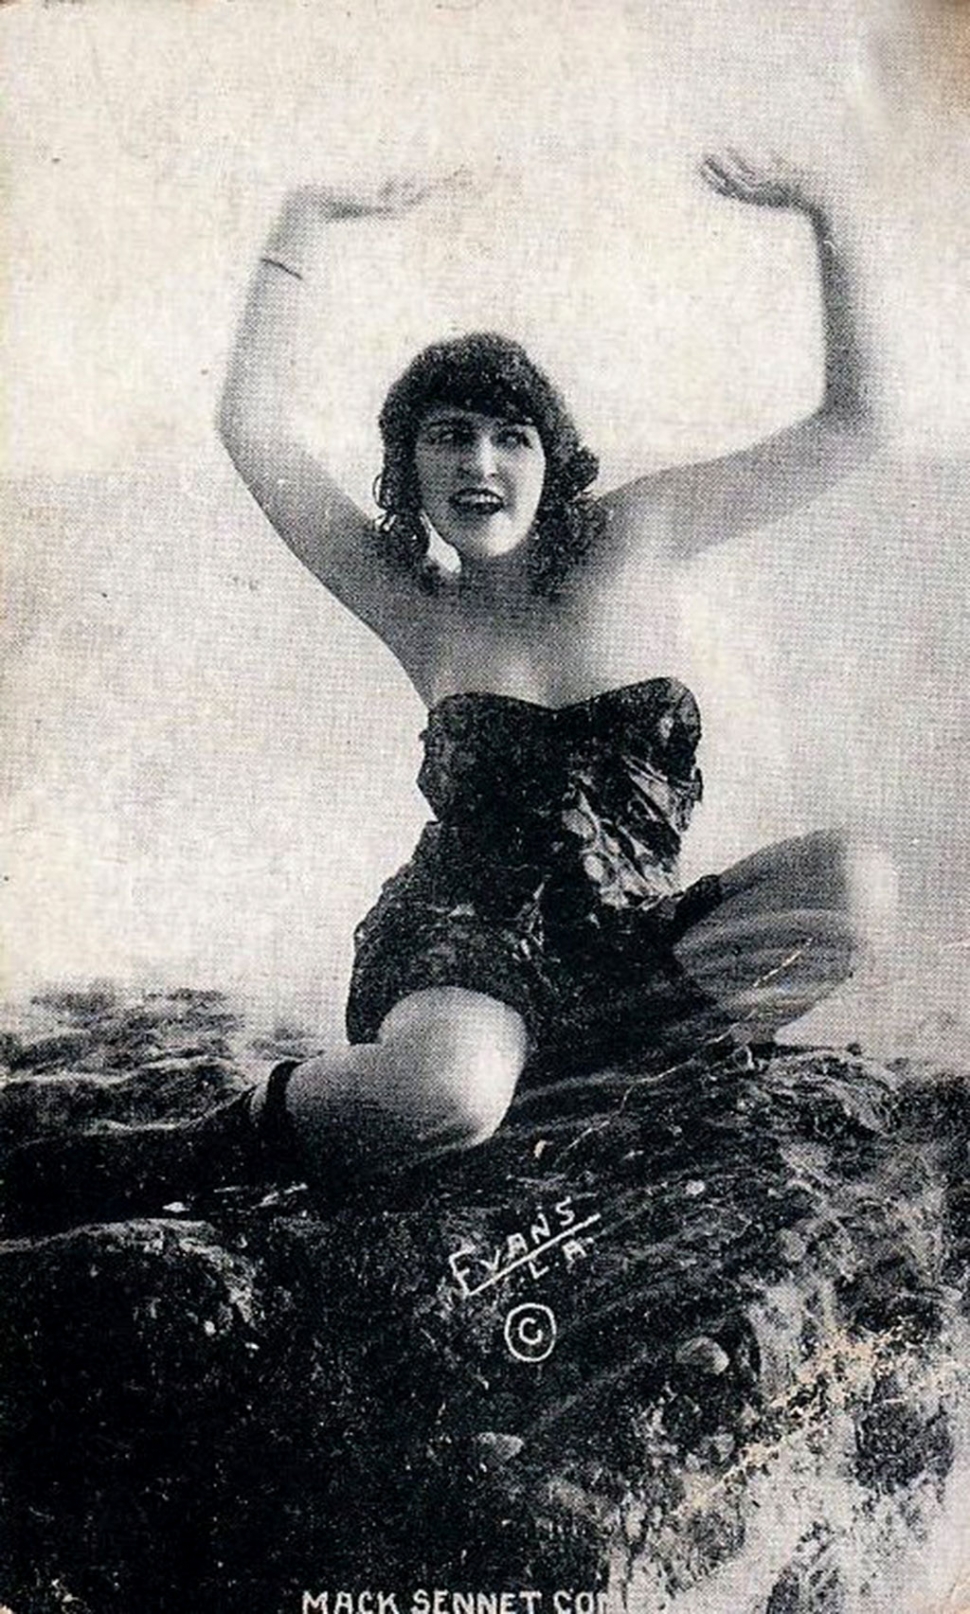 Mack Sennett Postcard - suggested caption: Beginning in 1915, Mack Sennett assembled a bevy of women known as the Sennett Bathing Beauties to appear in provocative bathing costumes in comedy short subjects, in promotional material, and in promotional events such as Venice Beach beauty contests. The Sennett Bathing Beauties continued to appear through 1928.